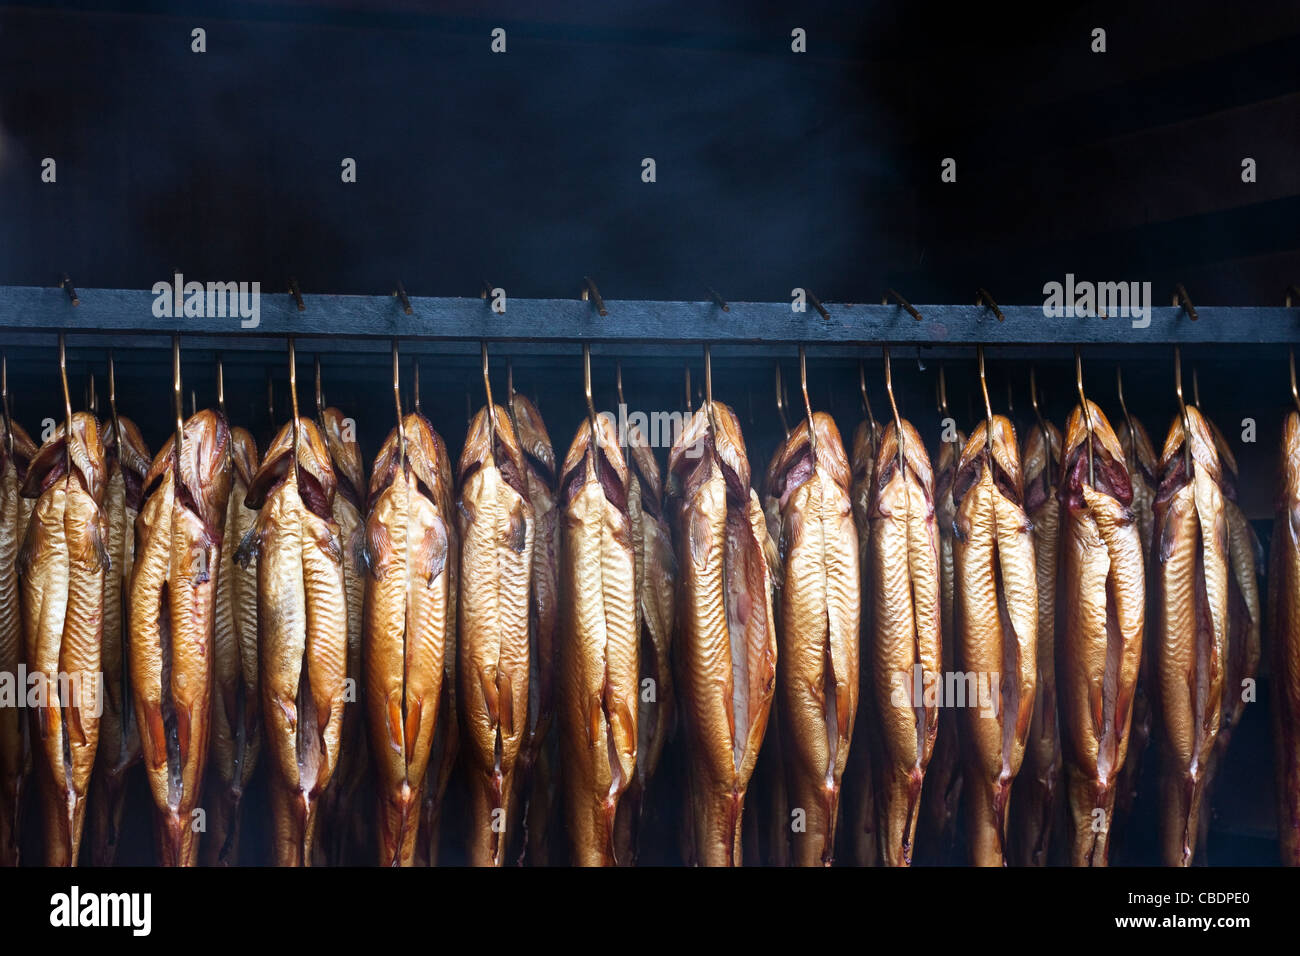 Smoking brook trout fish in an traditional oven Stock Photo